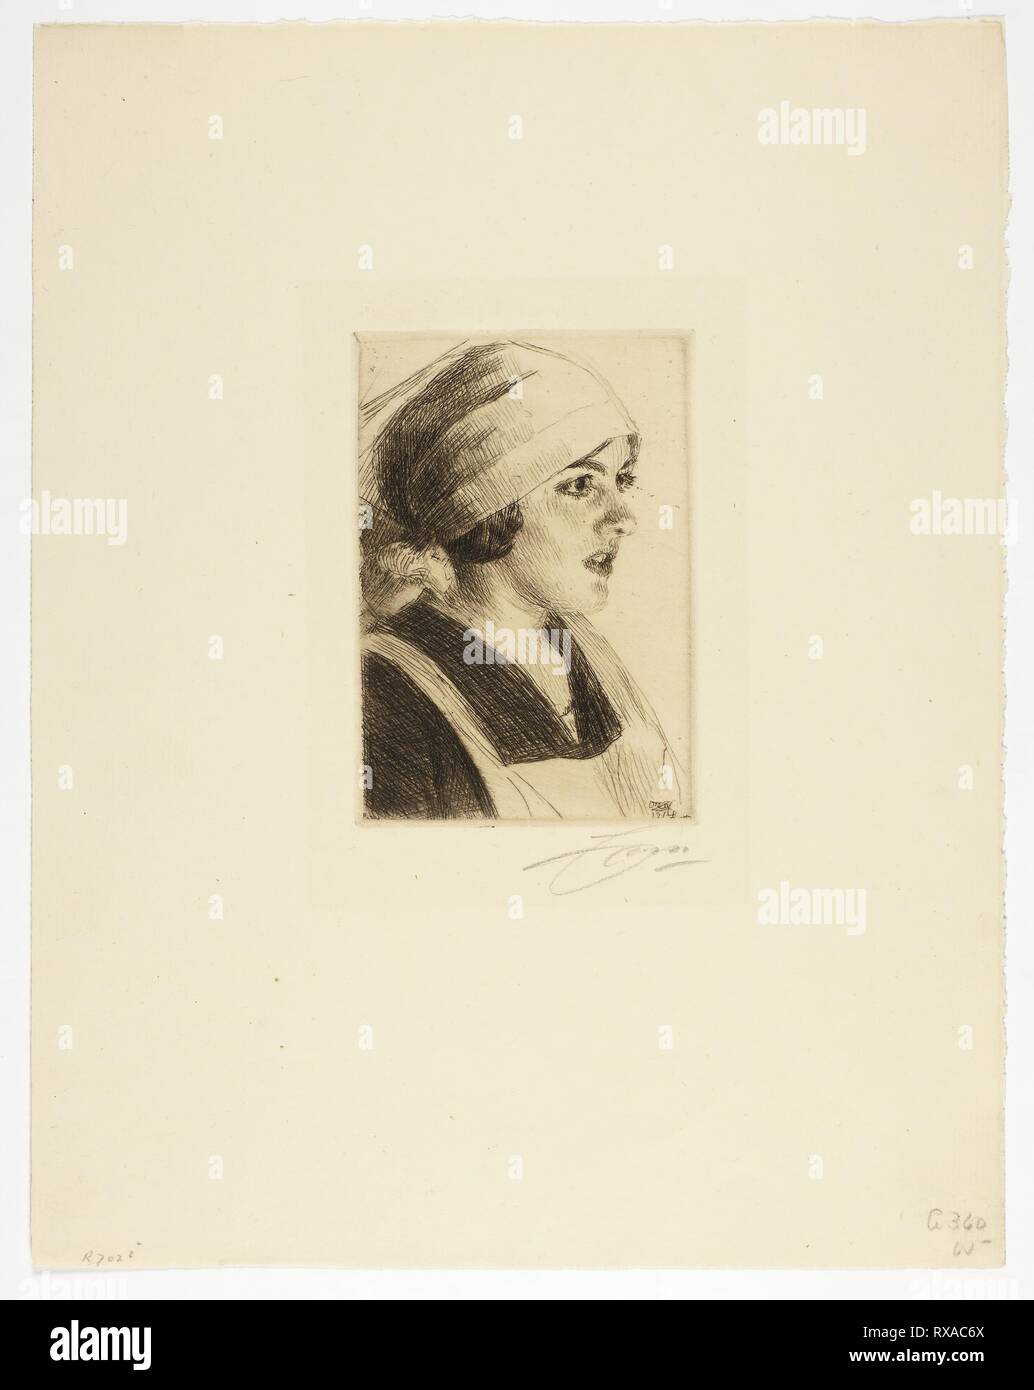 Gulli I. Anders Zorn; Swedish, 1860-1920. Date: 1914. Dimensions: 129 x 90  mm (image/plate); 323 x 253 mm (sheet). Etching in black on cream laid paper.  Origin: Sweden. Museum: The Chicago Art Institute Stock Photo - Alamy